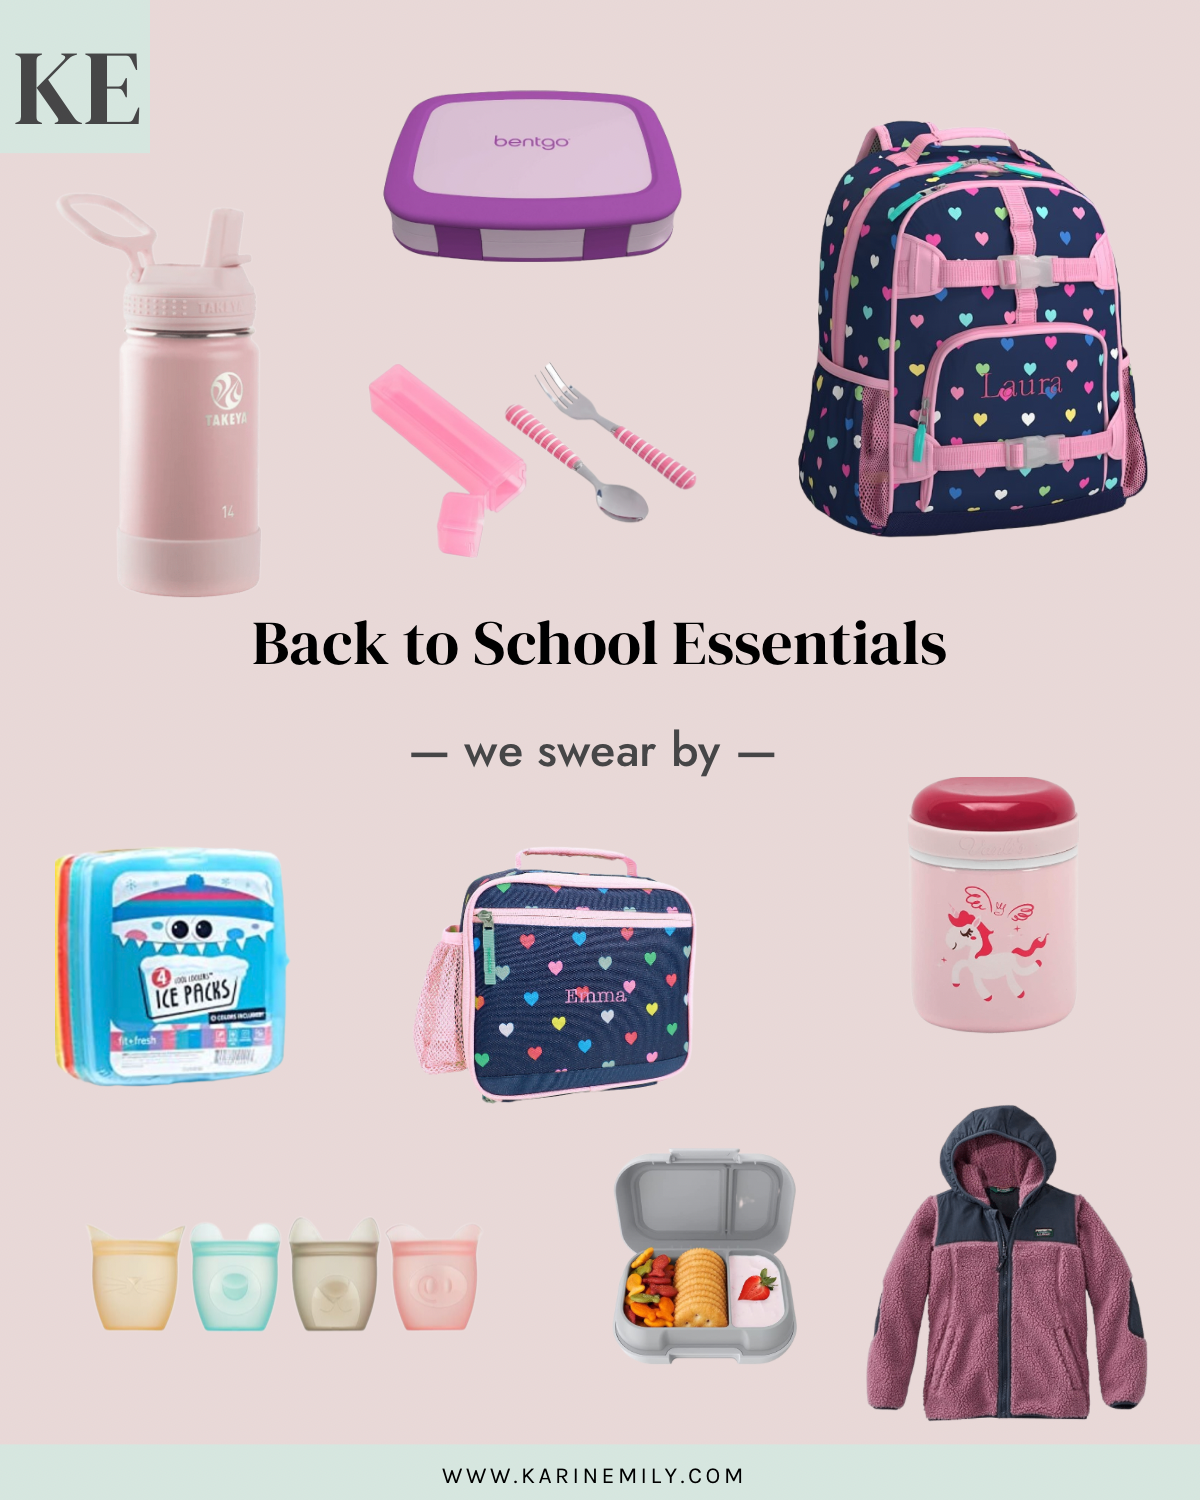 A collage of the best back to school kid's gear we swear by